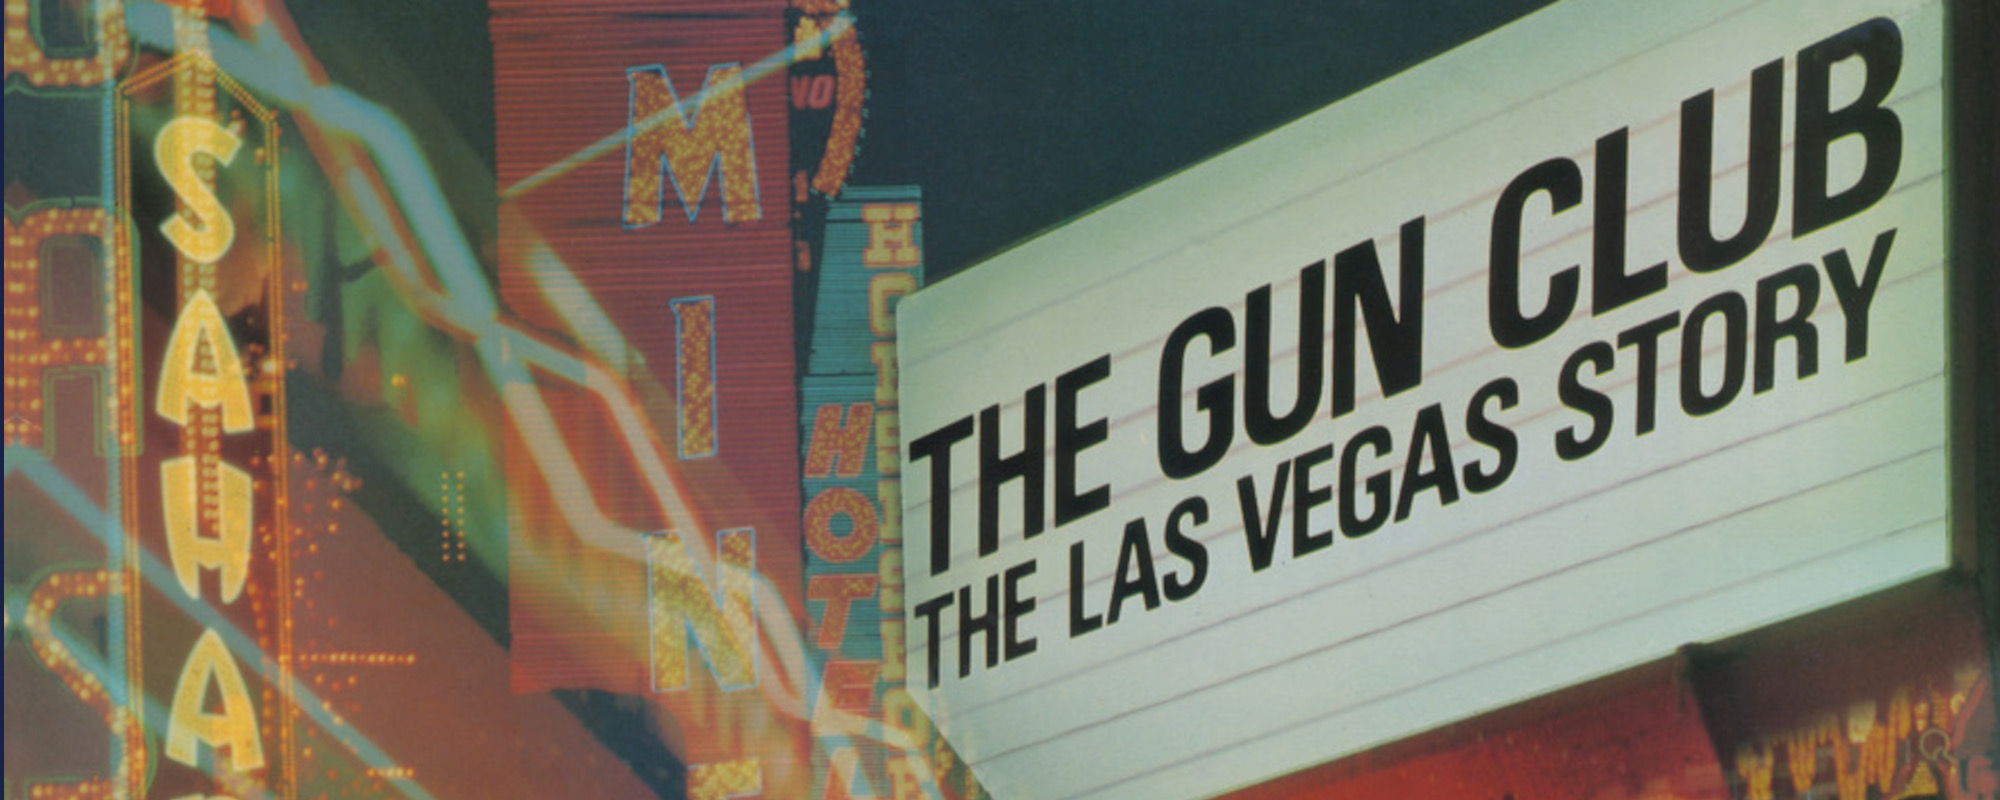 Review: The Gun Club’s ‘Las Vegas Story’ Expanded/Remixed Reissue Shows Frontman Jeffrey Lee Pierce at His Best and Worst